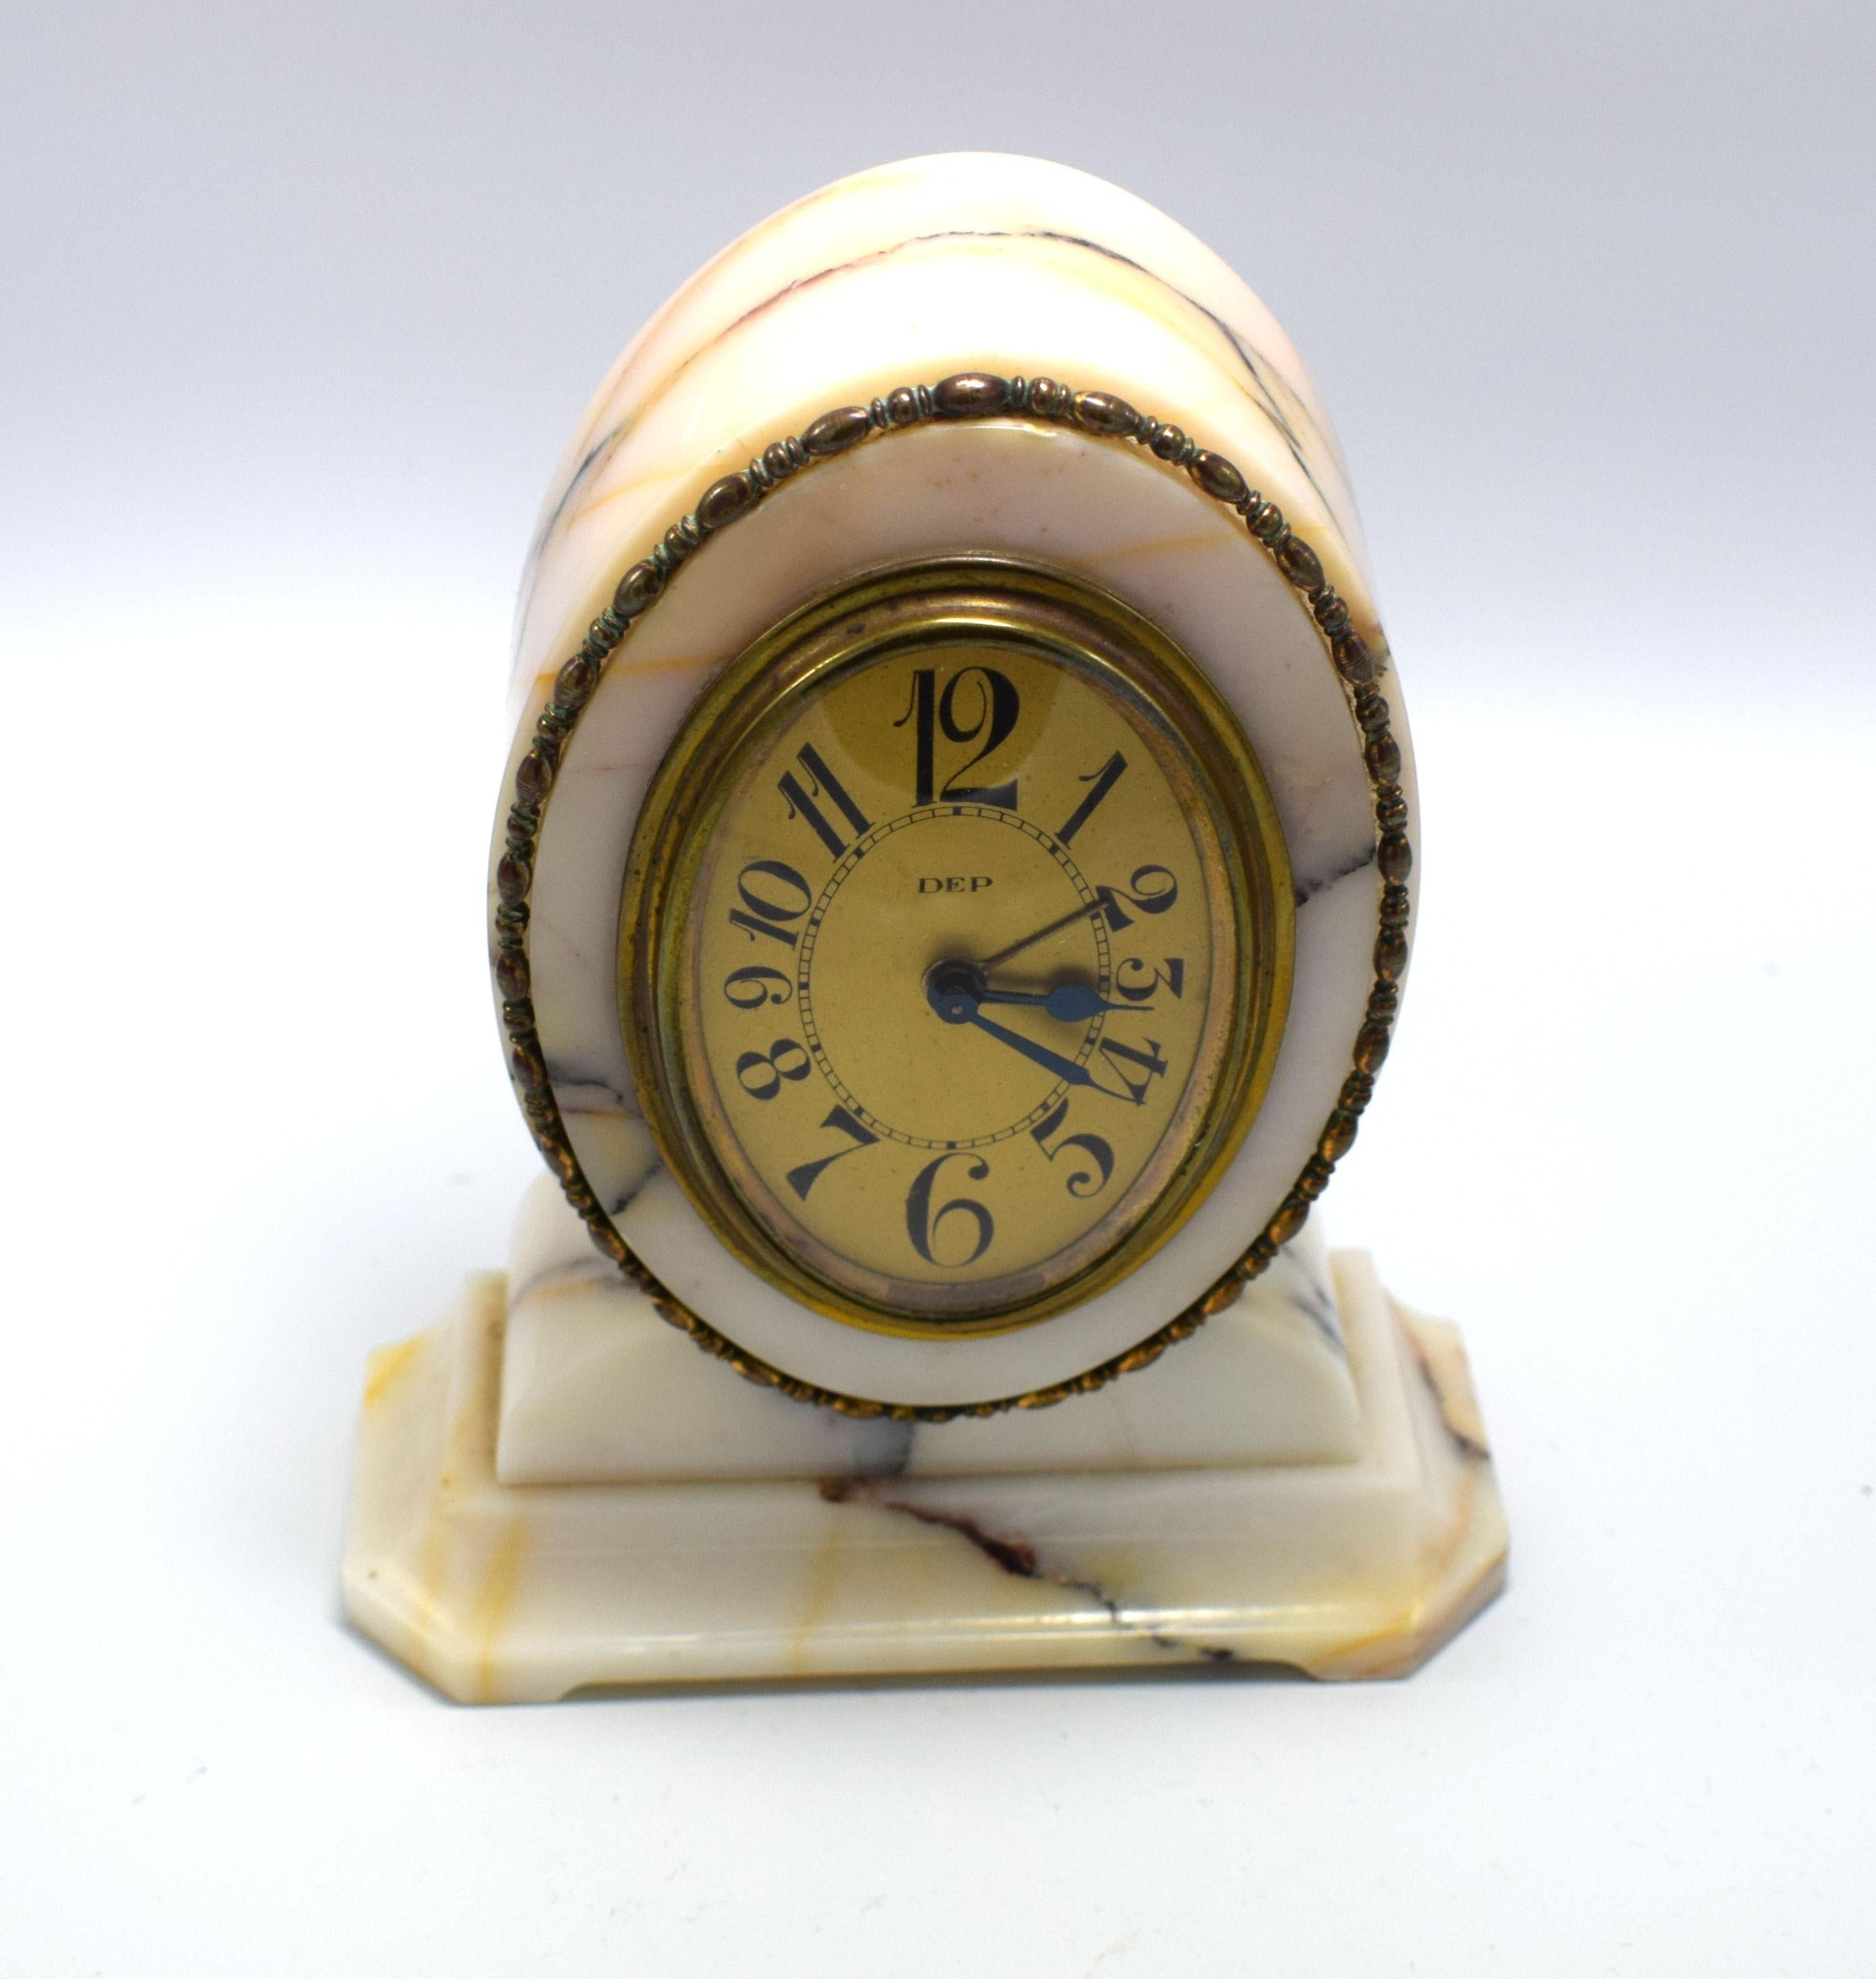 Fabulous 1930s Art Deco French alarm bedside clock by Dep. Really cute size, please see dimensions. The clock is encased in a cream /off white marble with beautiful pink and black veins running through. Unusual oval shape with brass accents. Great